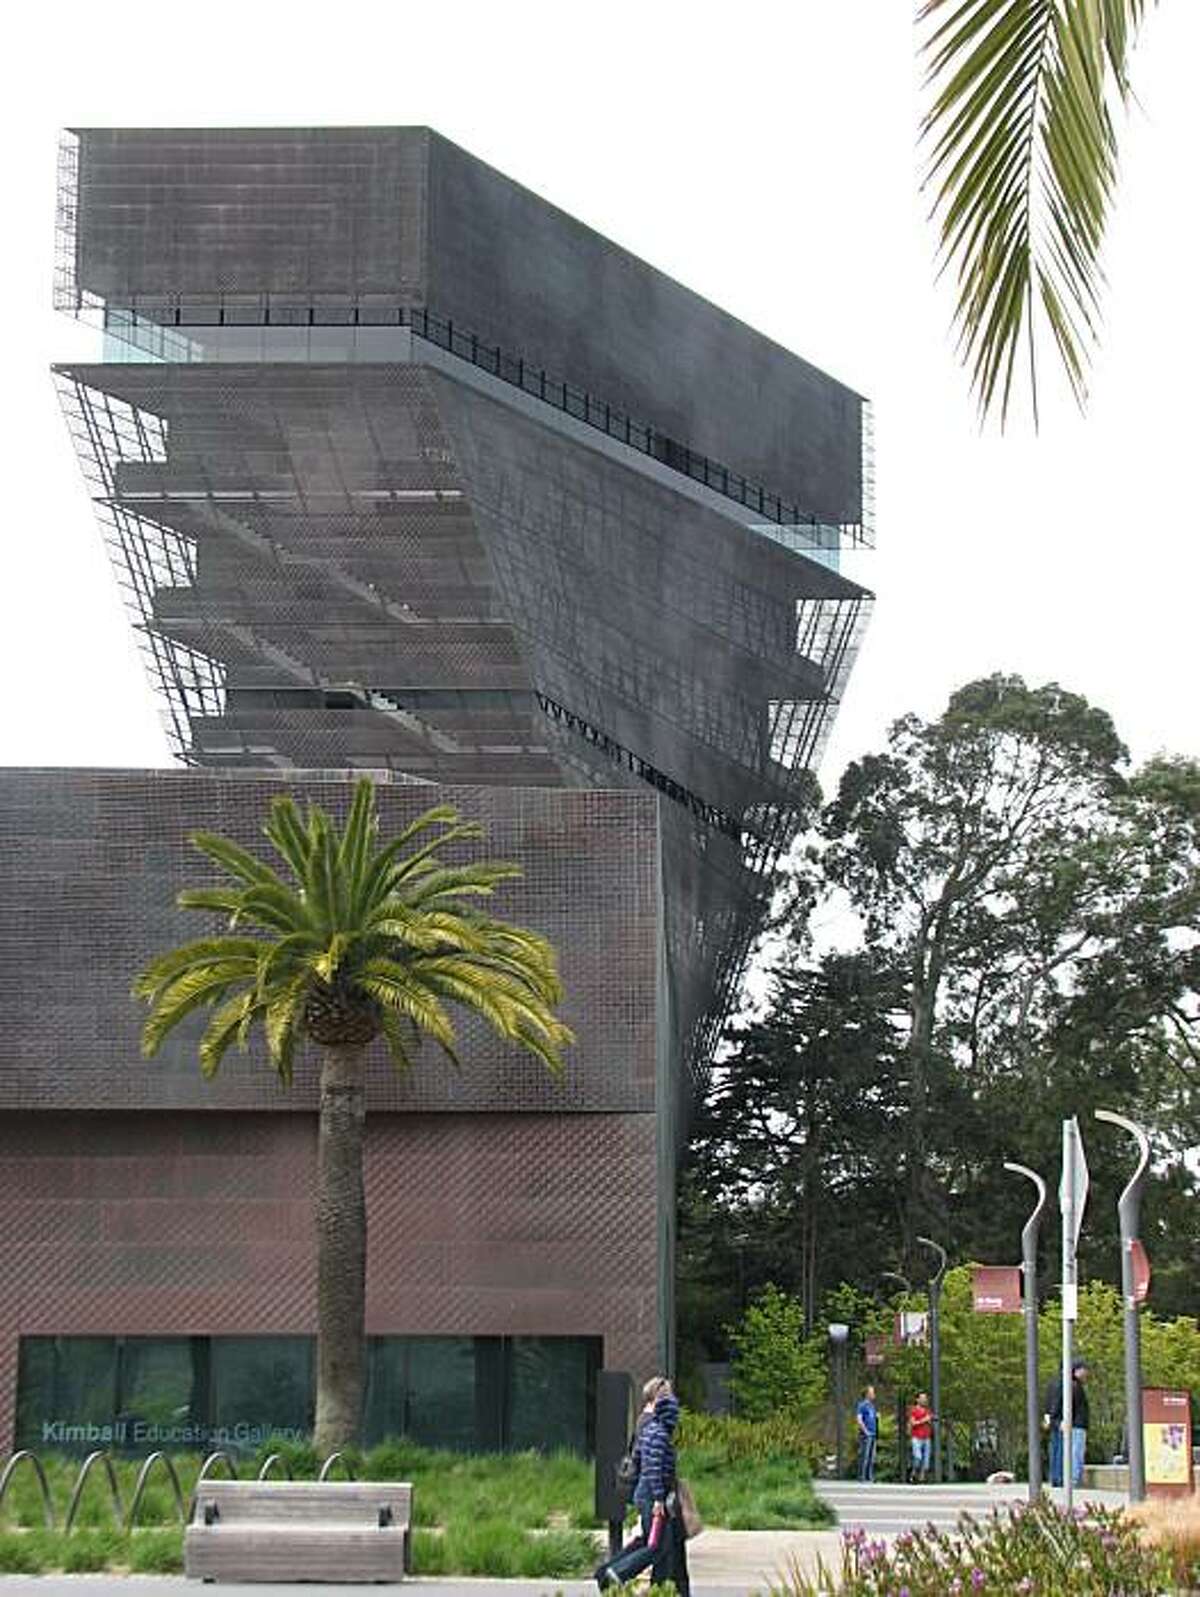 No aspect of the architecture of the M.H. de Young Memorial Museum is more than distinctive than its tower, a copper-clad shaft that takes on much different forms when viewed from many different angles.